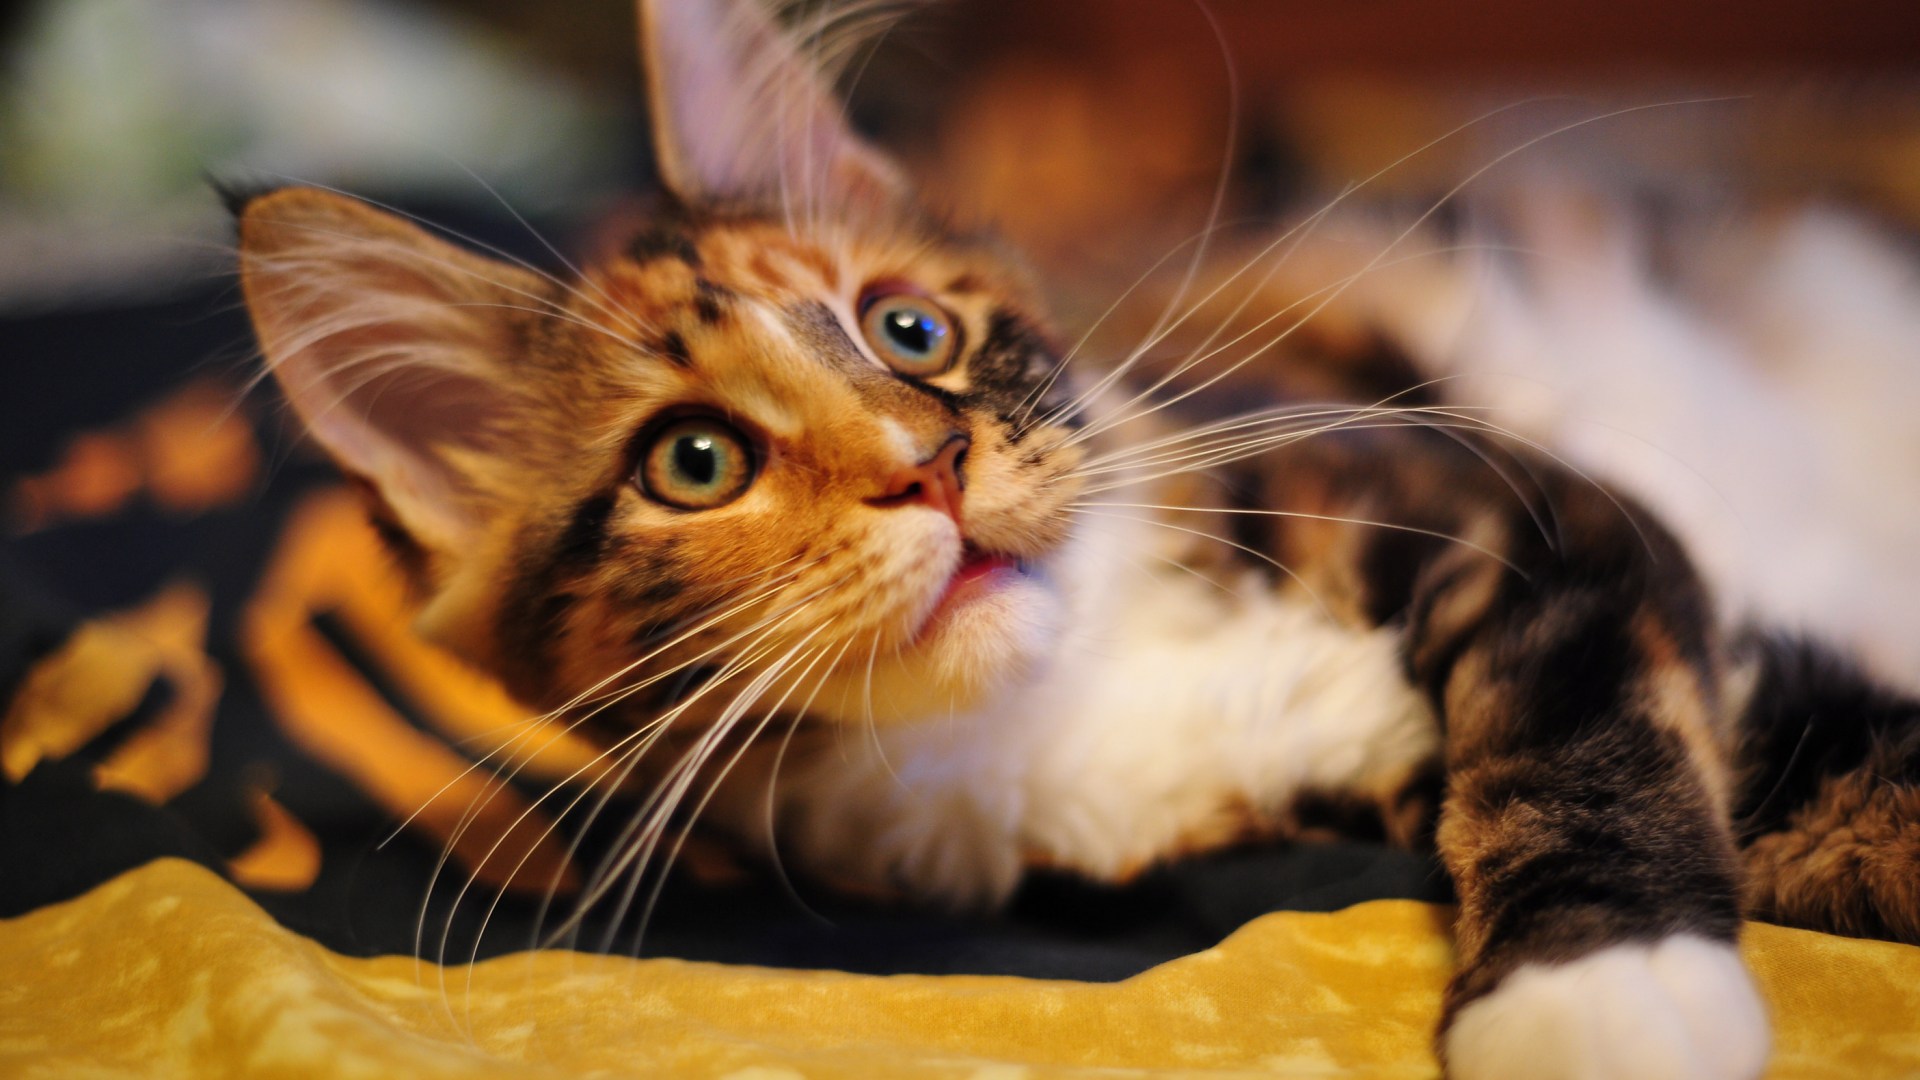 www-getbg-net_animals___cats_a_young_maine_coon_cat_with_a_playful_glance_044940_